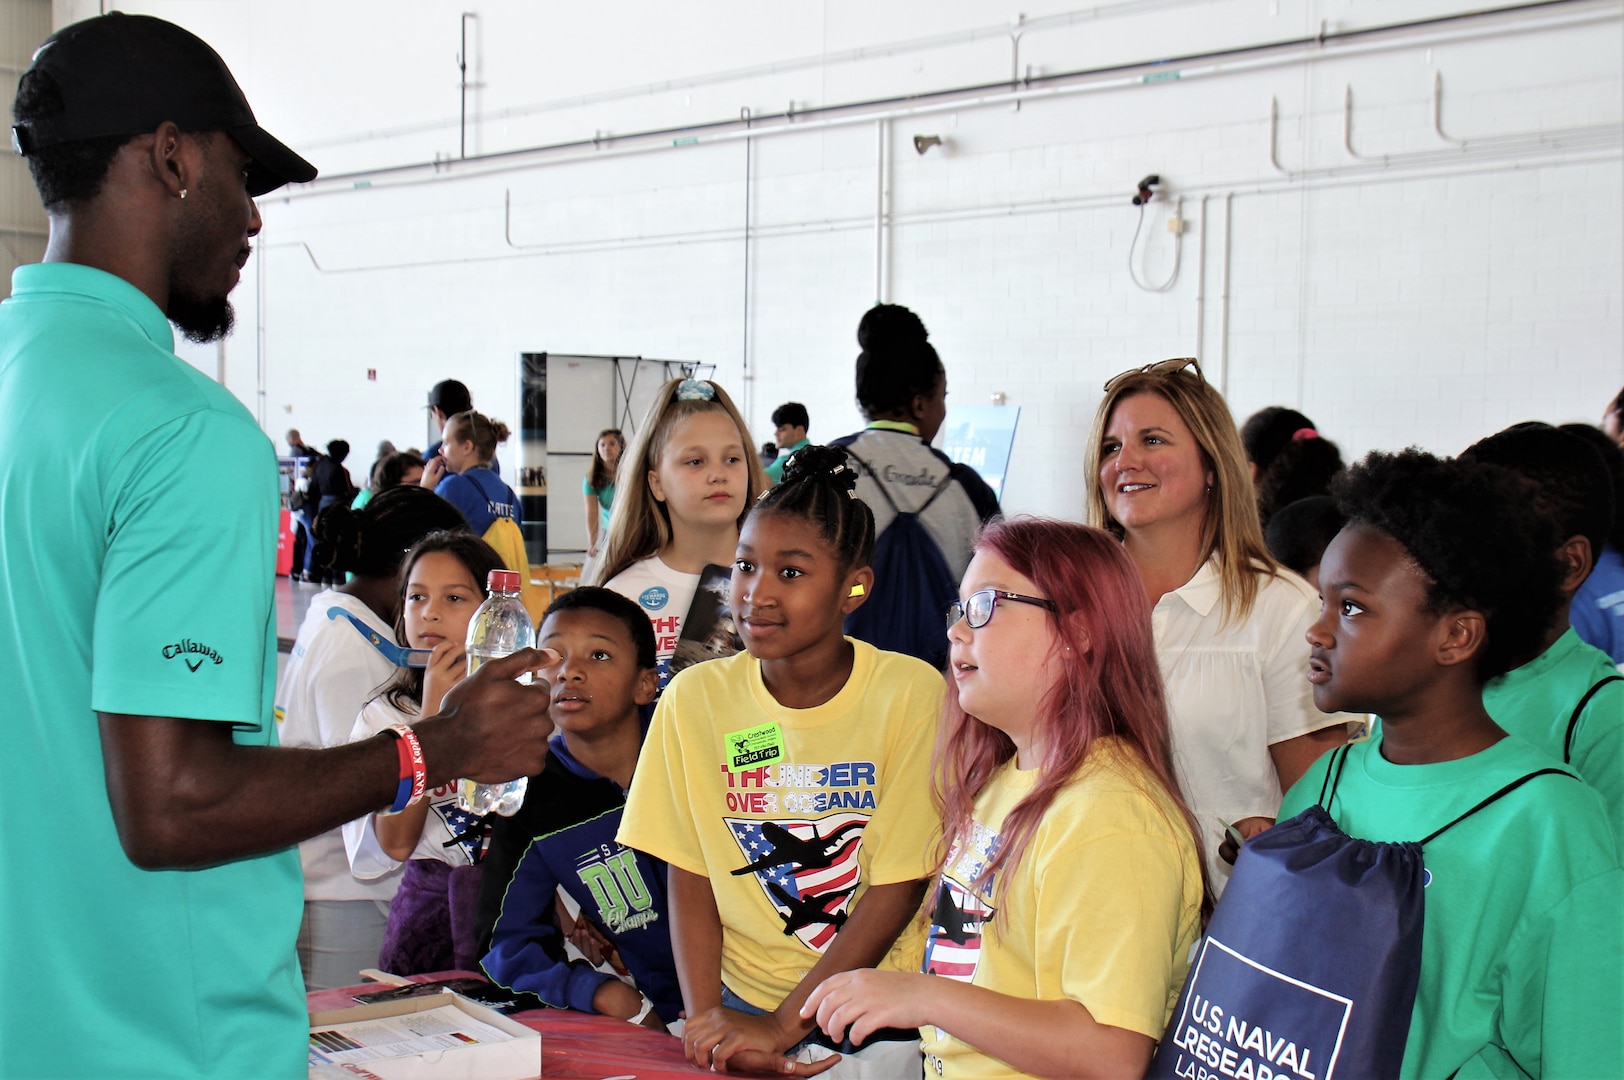 IMAGE: VIRGINIA BEACH, Va. (Sept. 20, 2019) – Devon McKiver, Naval Surface Warfare Center Dahlgren Division (NSWCDD) scientist, explains a water bottle demonstration to students at Naval Air Stations Oceana’s fourth annual Science, Technology, Engineering and Mathematics (STEM) Lab. He was among 30 scientists and engineers from Naval Surface Warfare Center Dahlgren Division (NSWCDD) Dam Neck Activity and NSWCDD who volunteered their time and talents to educate students through hands-on STEM displays. (U.S. Navy photo by George Bieber/Released)